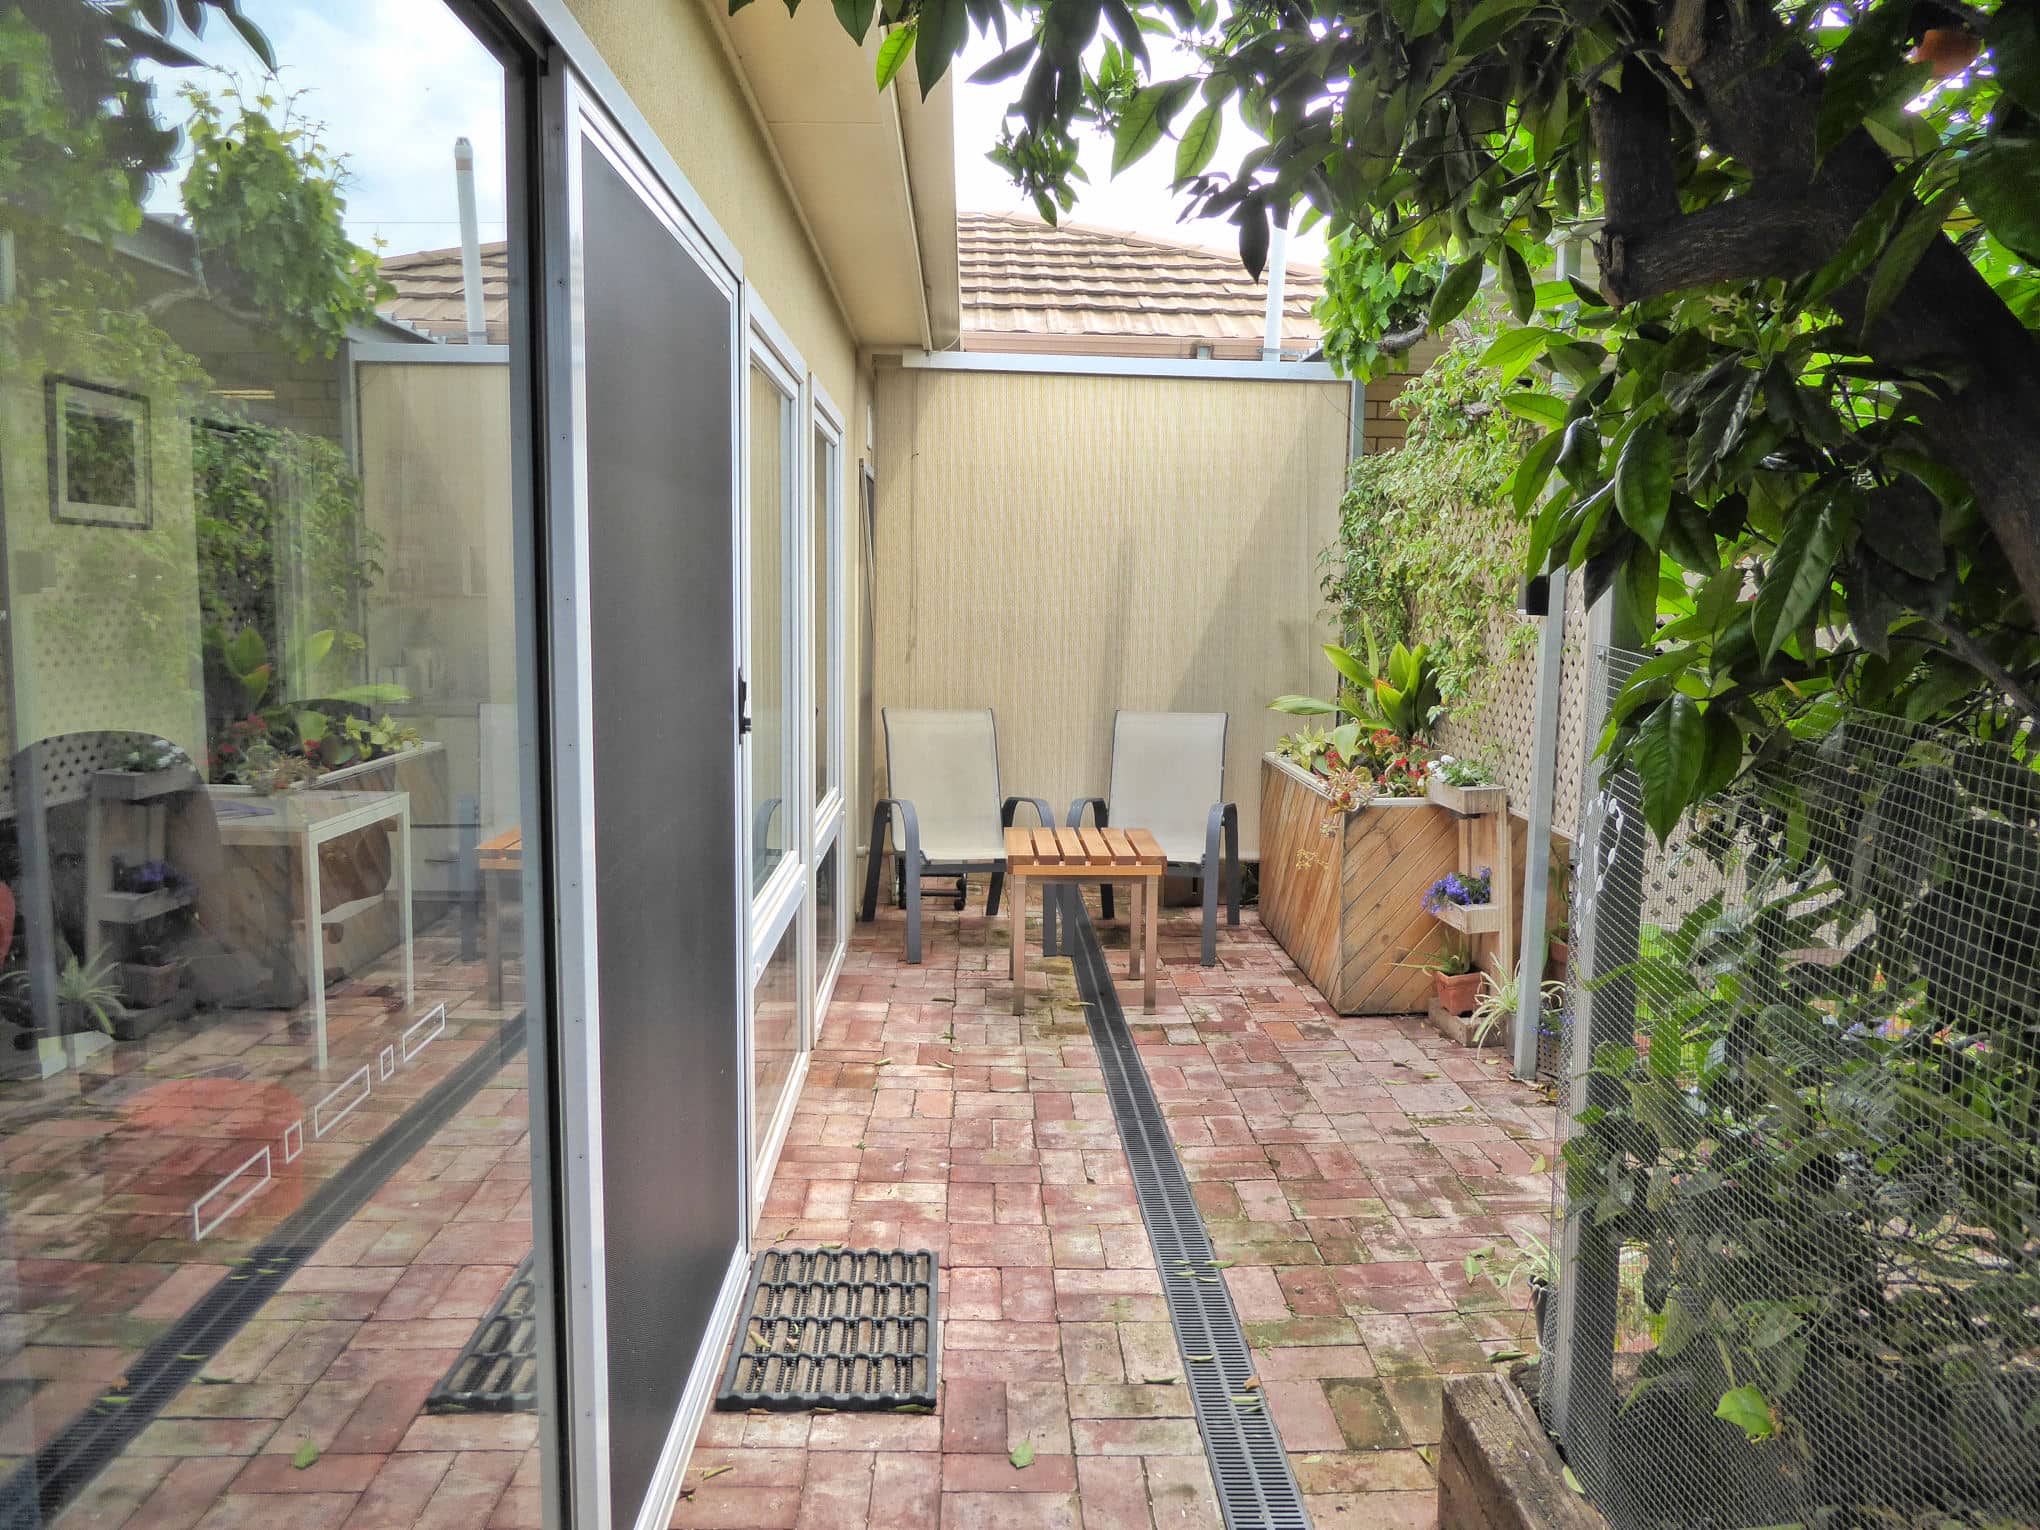 Brick courtyard, with planter box, orange tree and full-length windows into roo,